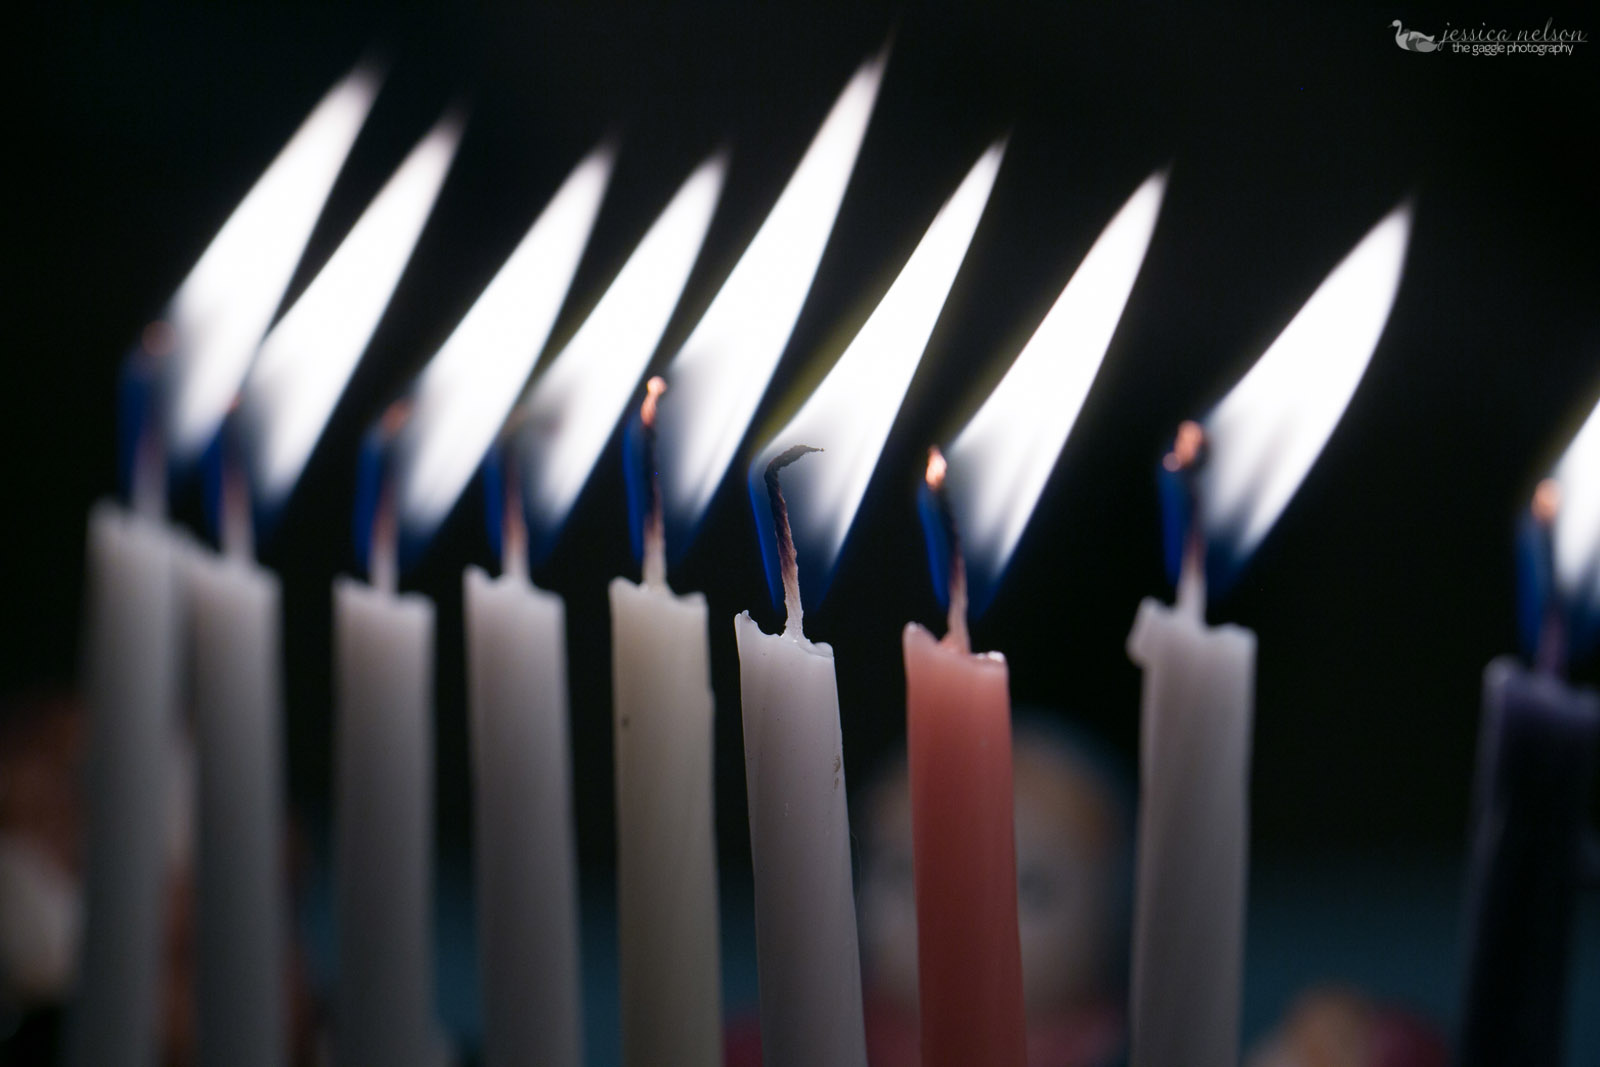 8 ways to photograph your hanukkah celebration by Jessica Nelson